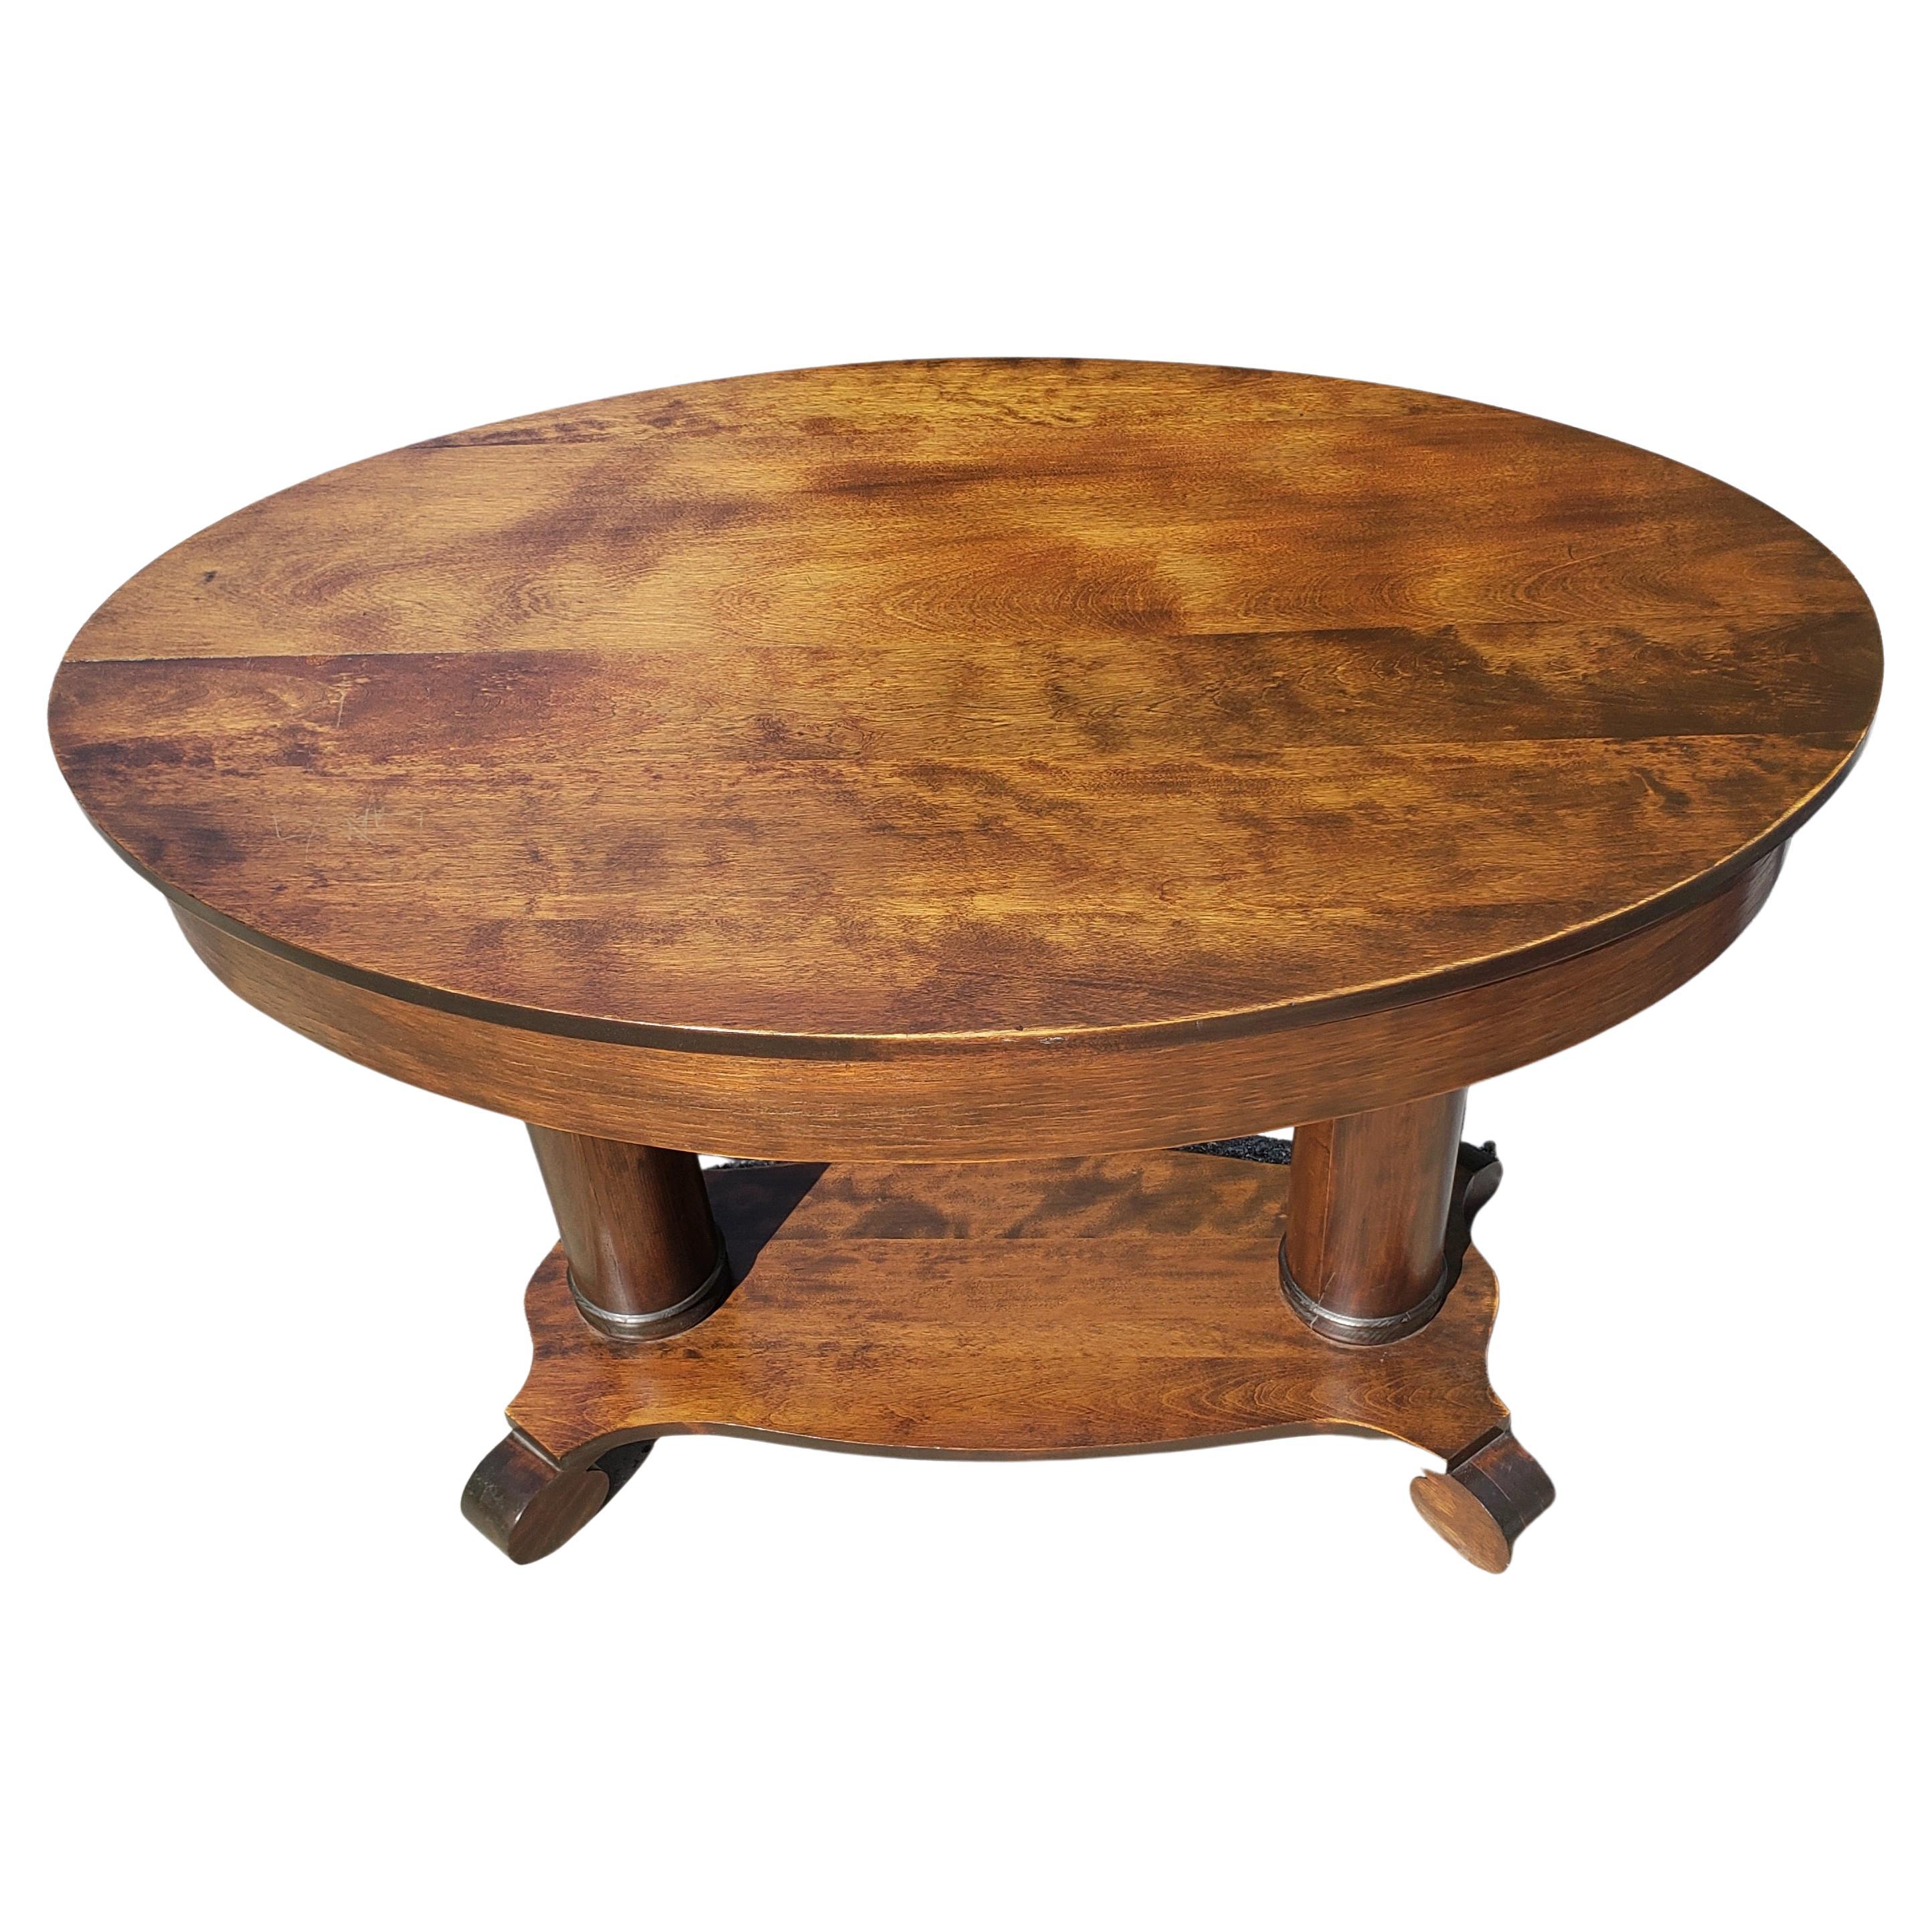 American Empire Style Oval Stained Oak Library Table In Good Condition For Sale In Germantown, MD